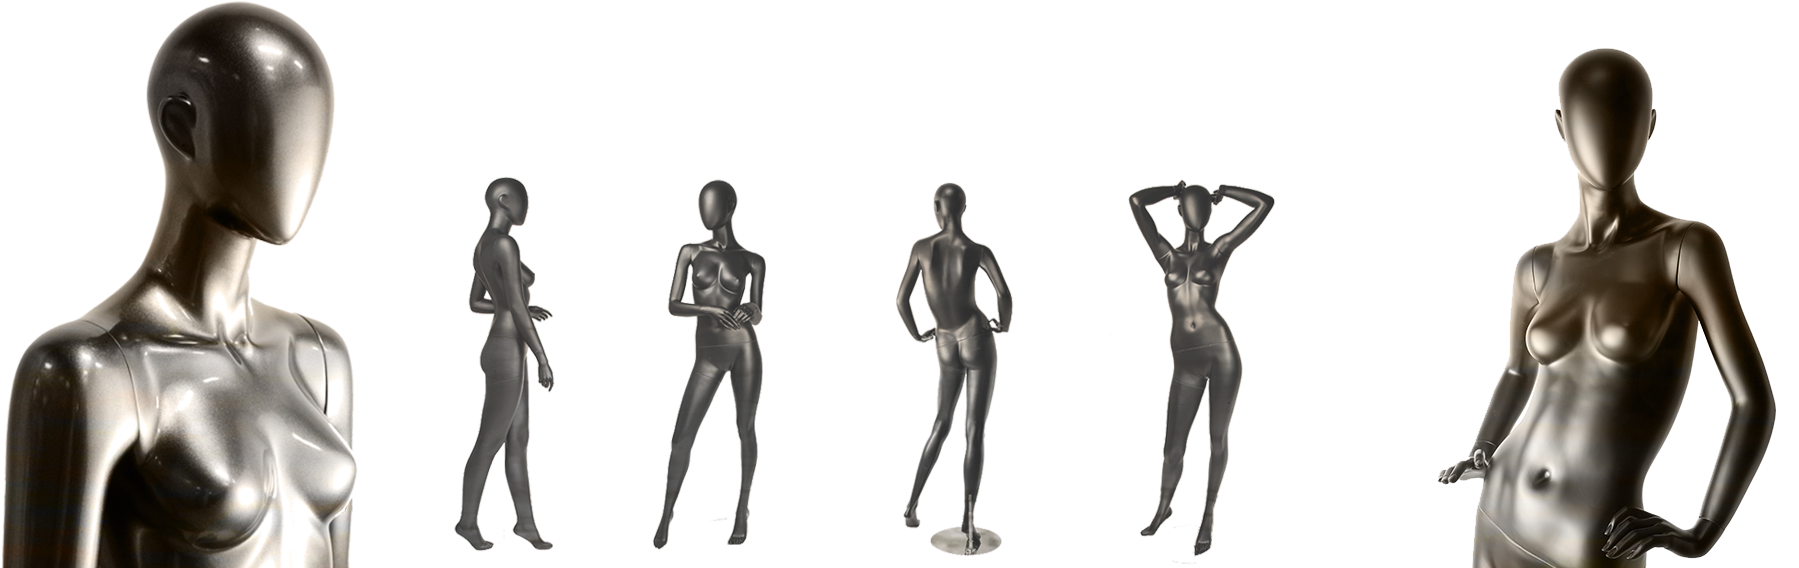 Several Mannequins In Different Poses